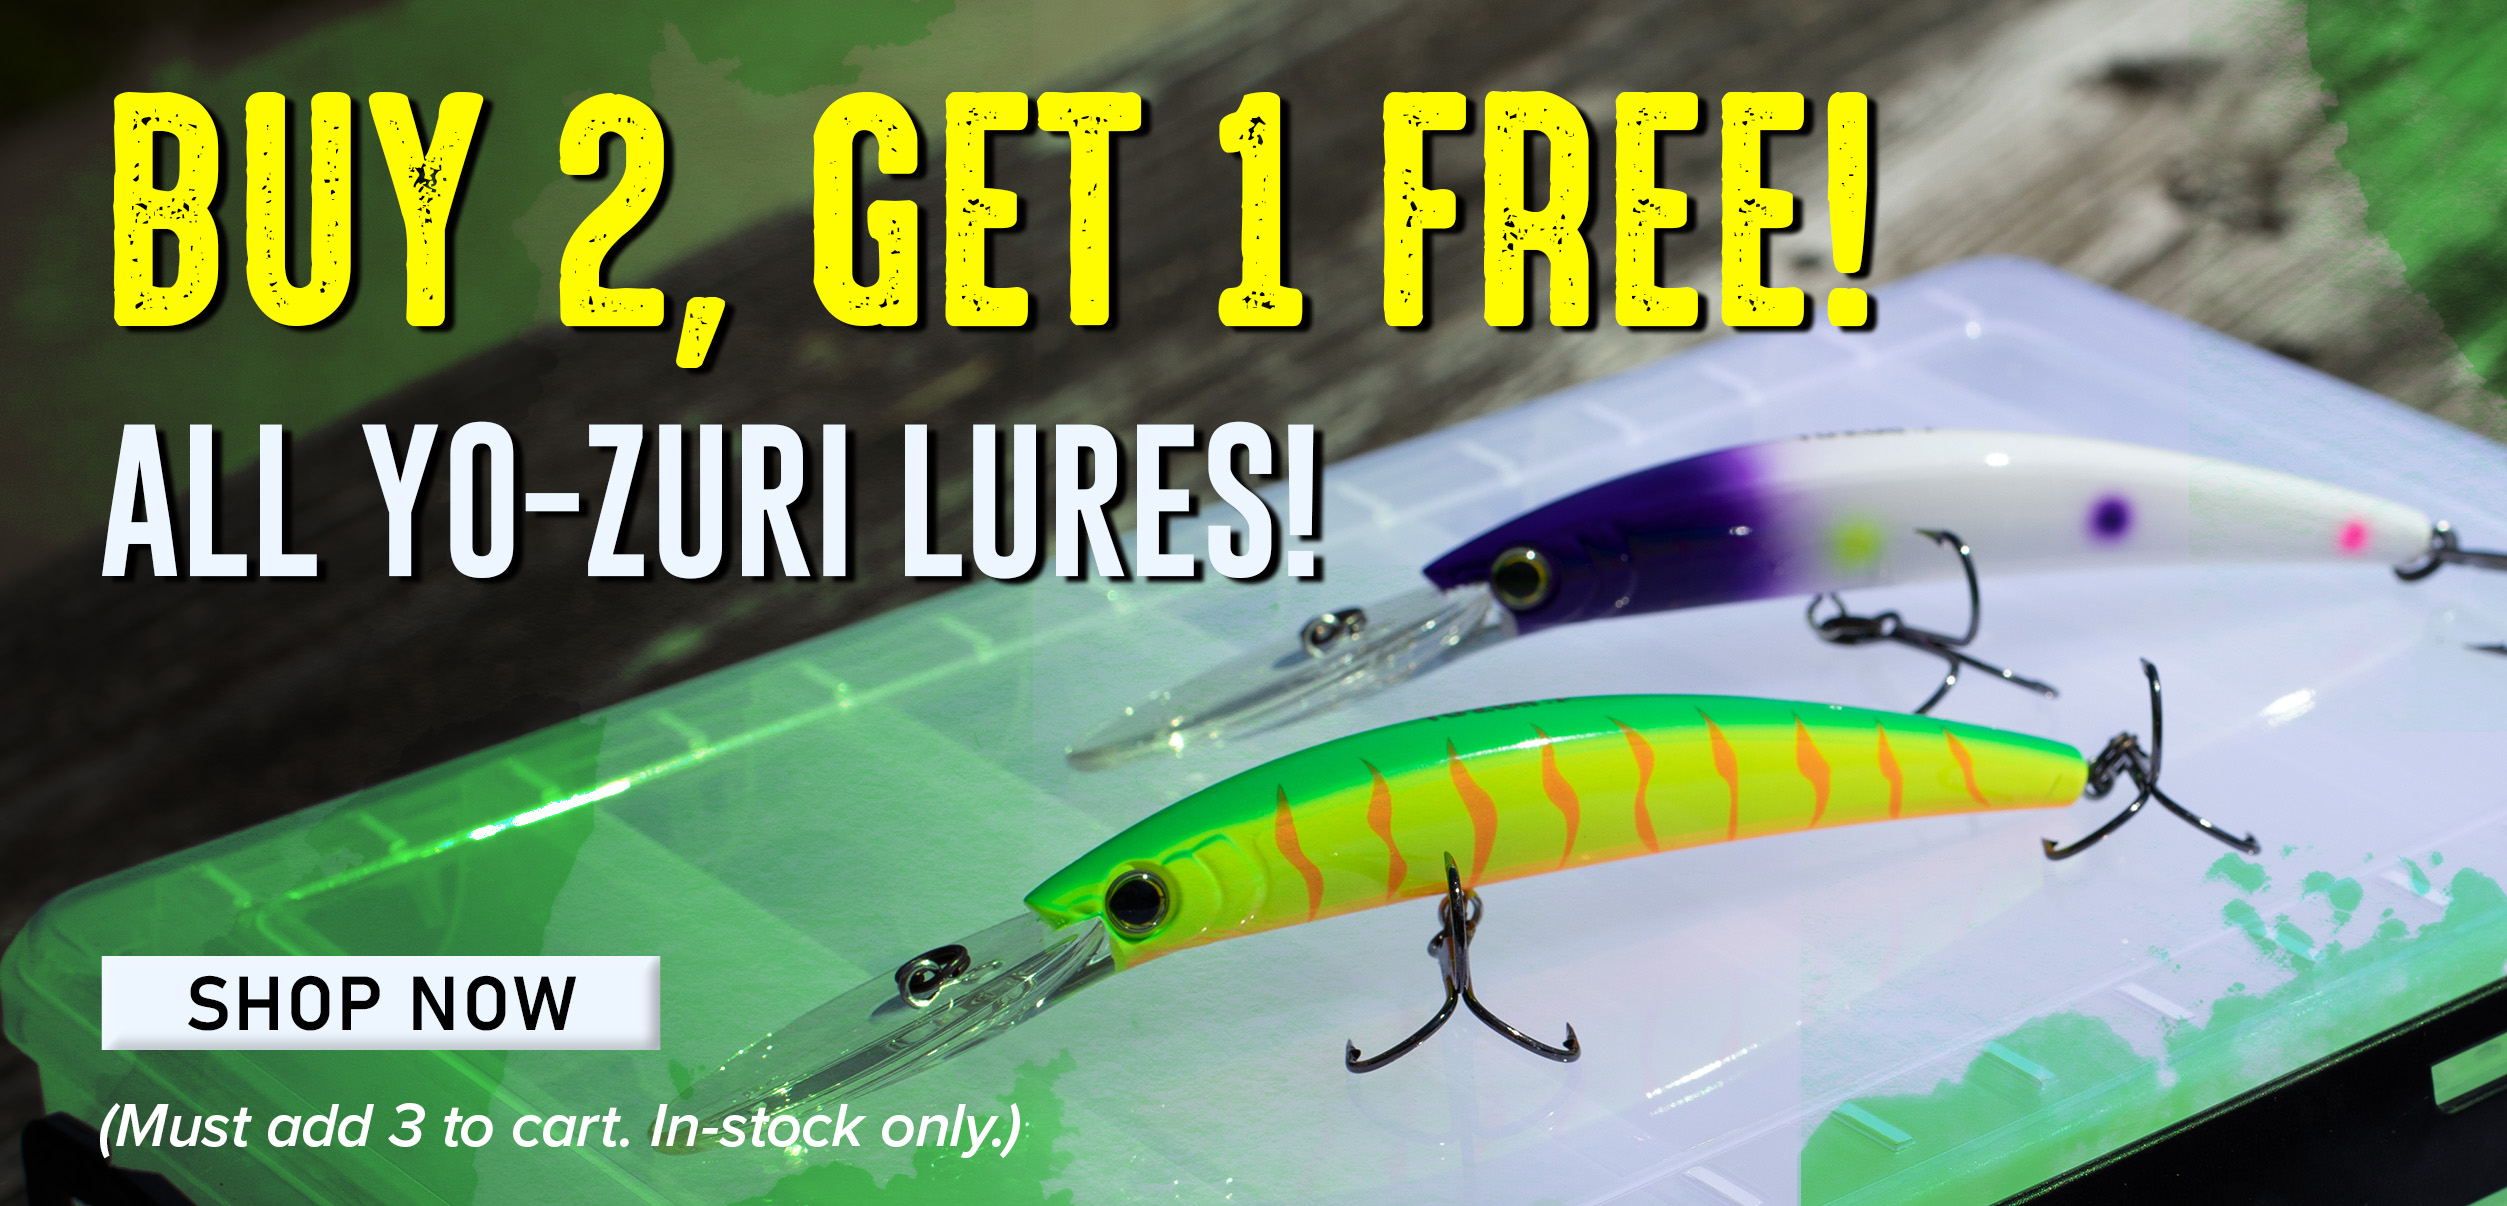 Buy 2, Get 1 Free! All Yo-Zuri Lures! Shop Now (Must add 3 to cart. In-stock only.)